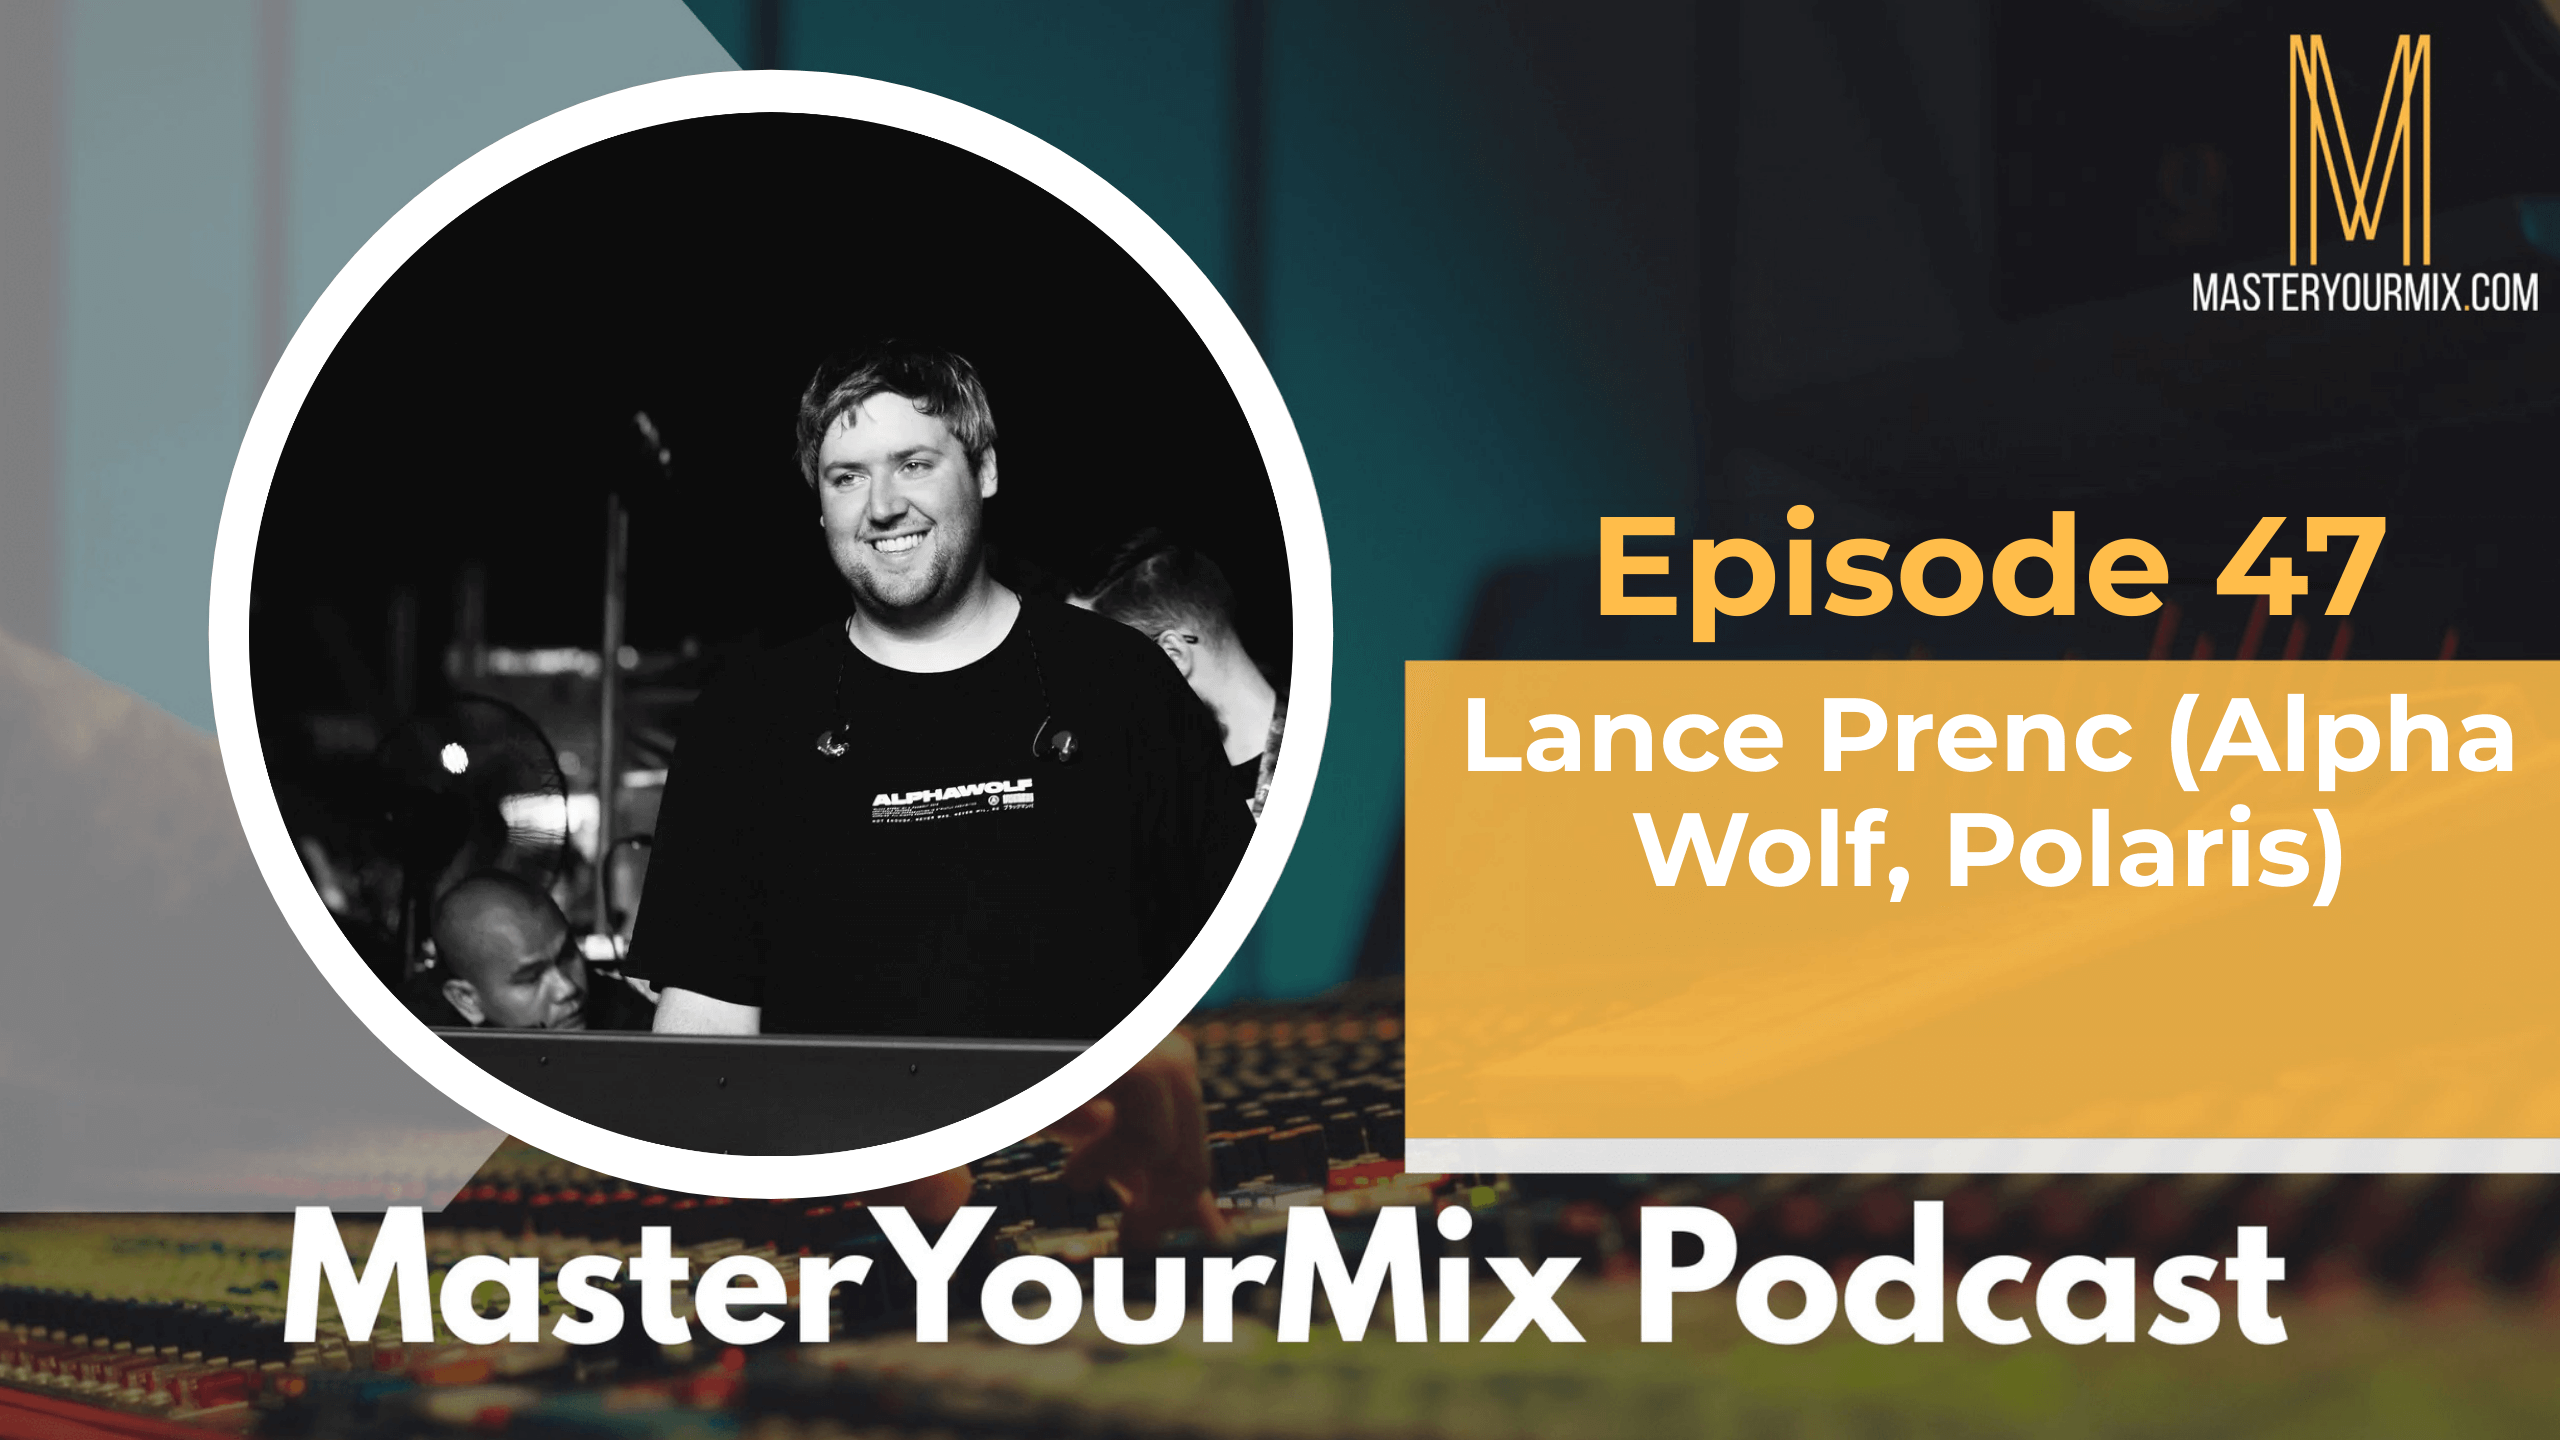 master your mix podcast, ep 47 lance prenc